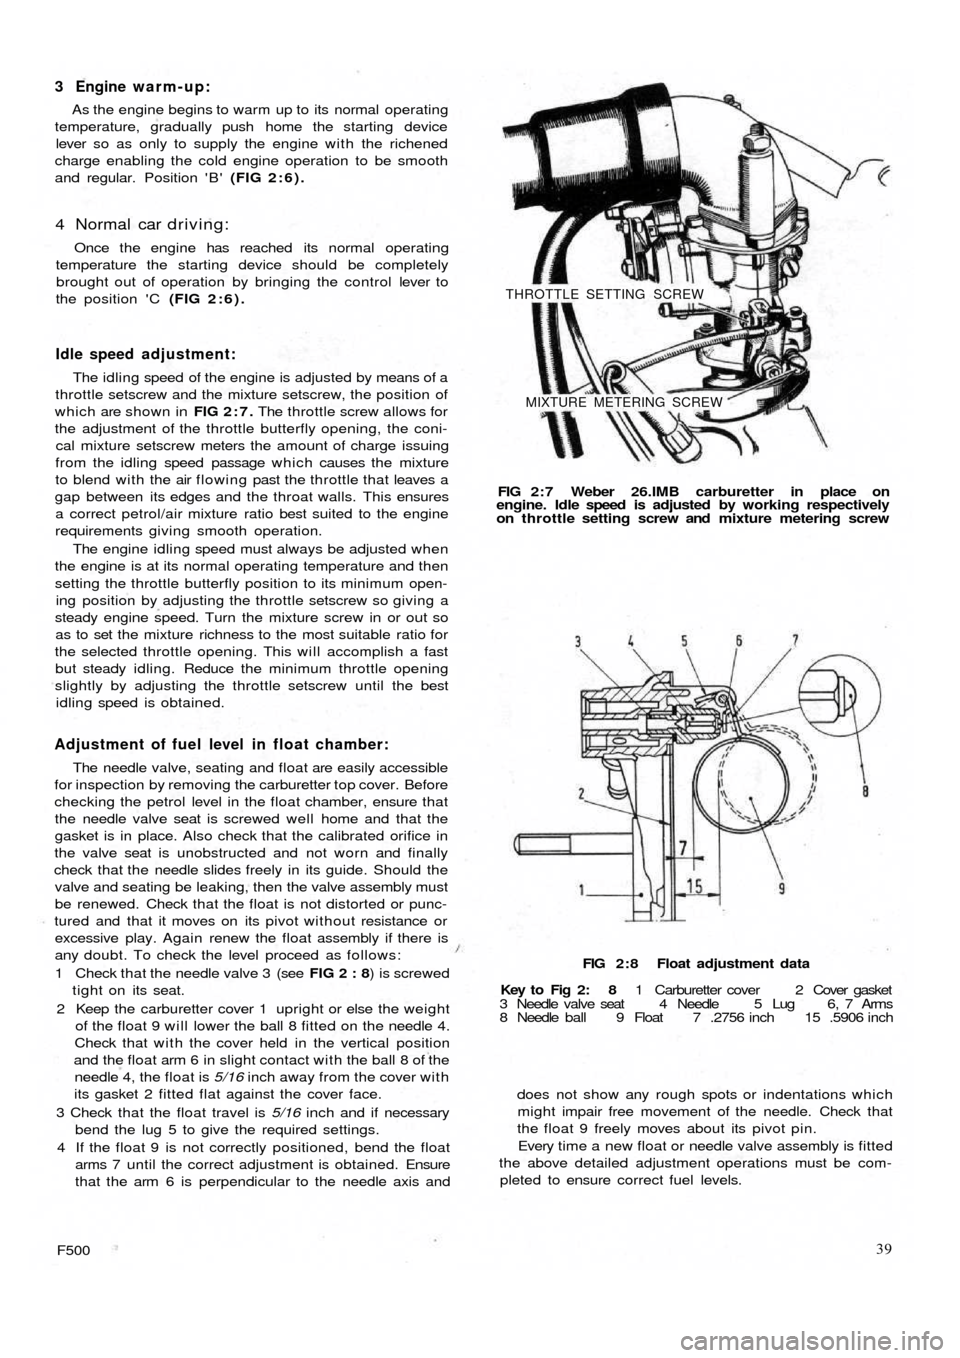 FIAT 500 1969 1.G Owners Guide 3 Engine warm-up:
As the  engine begins to warm up to its normal operating
temperature, gradually push home the starting device
lever so as only to supply the engine with the richened
charge enabling 